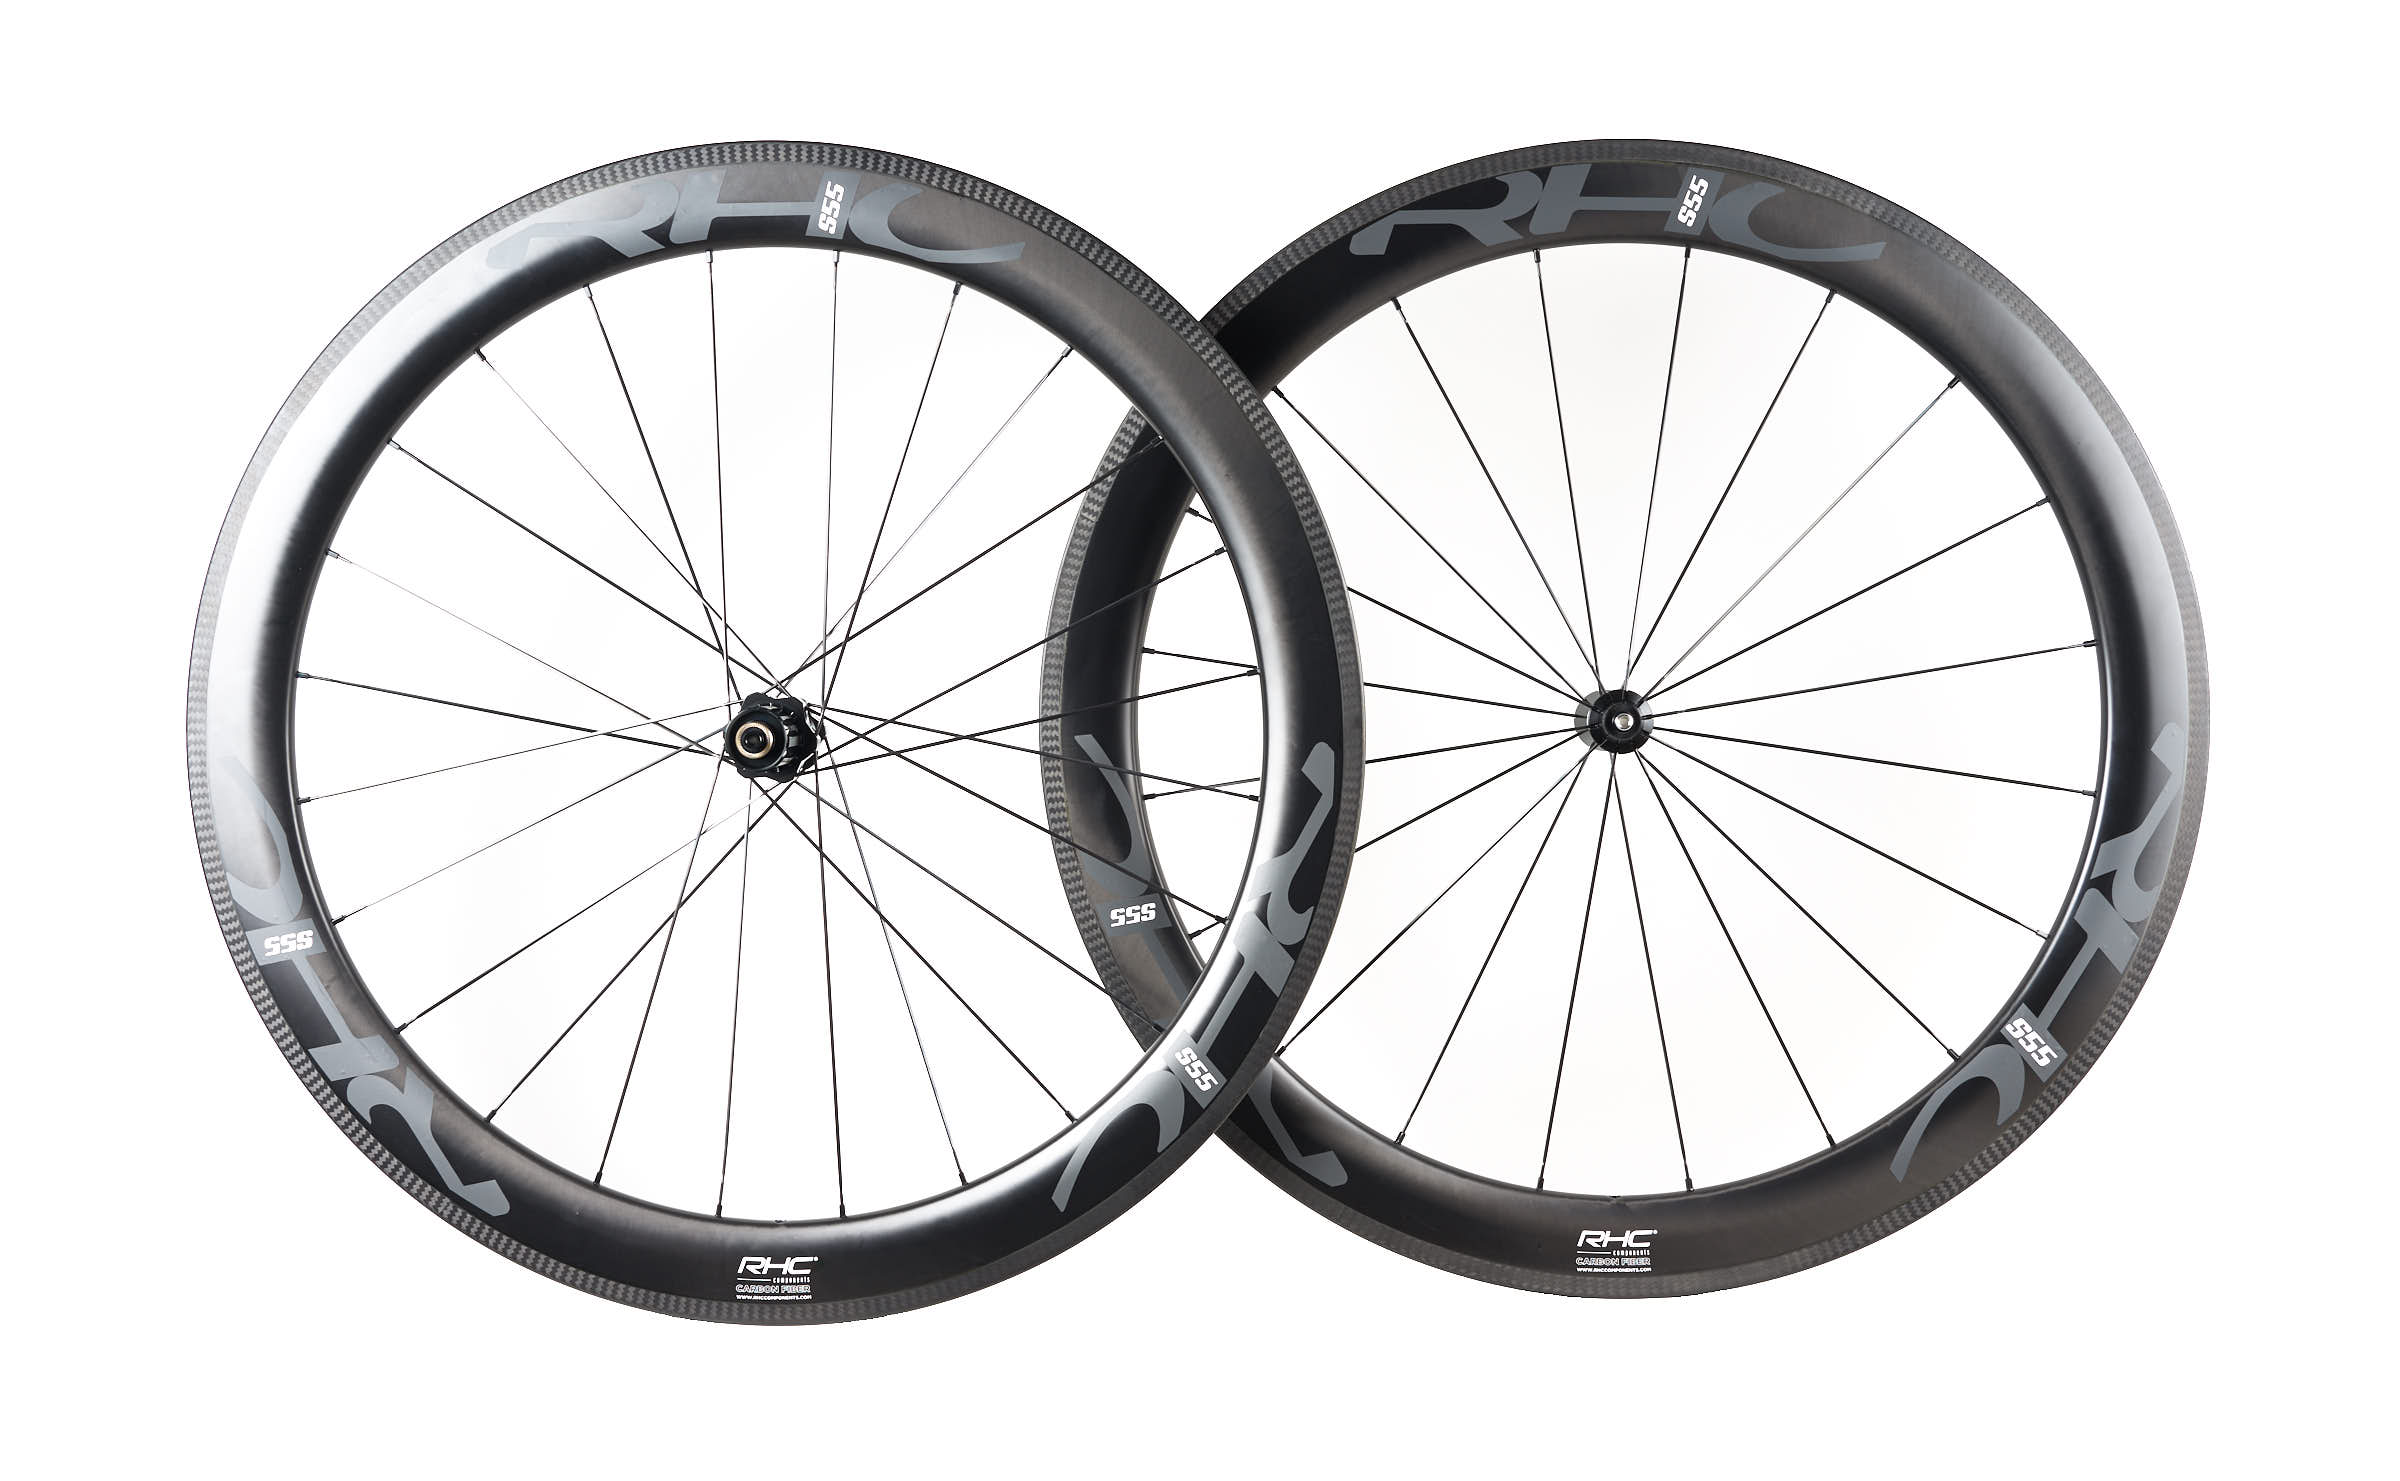 S.55 ROAD WHEELSET – RHC Components